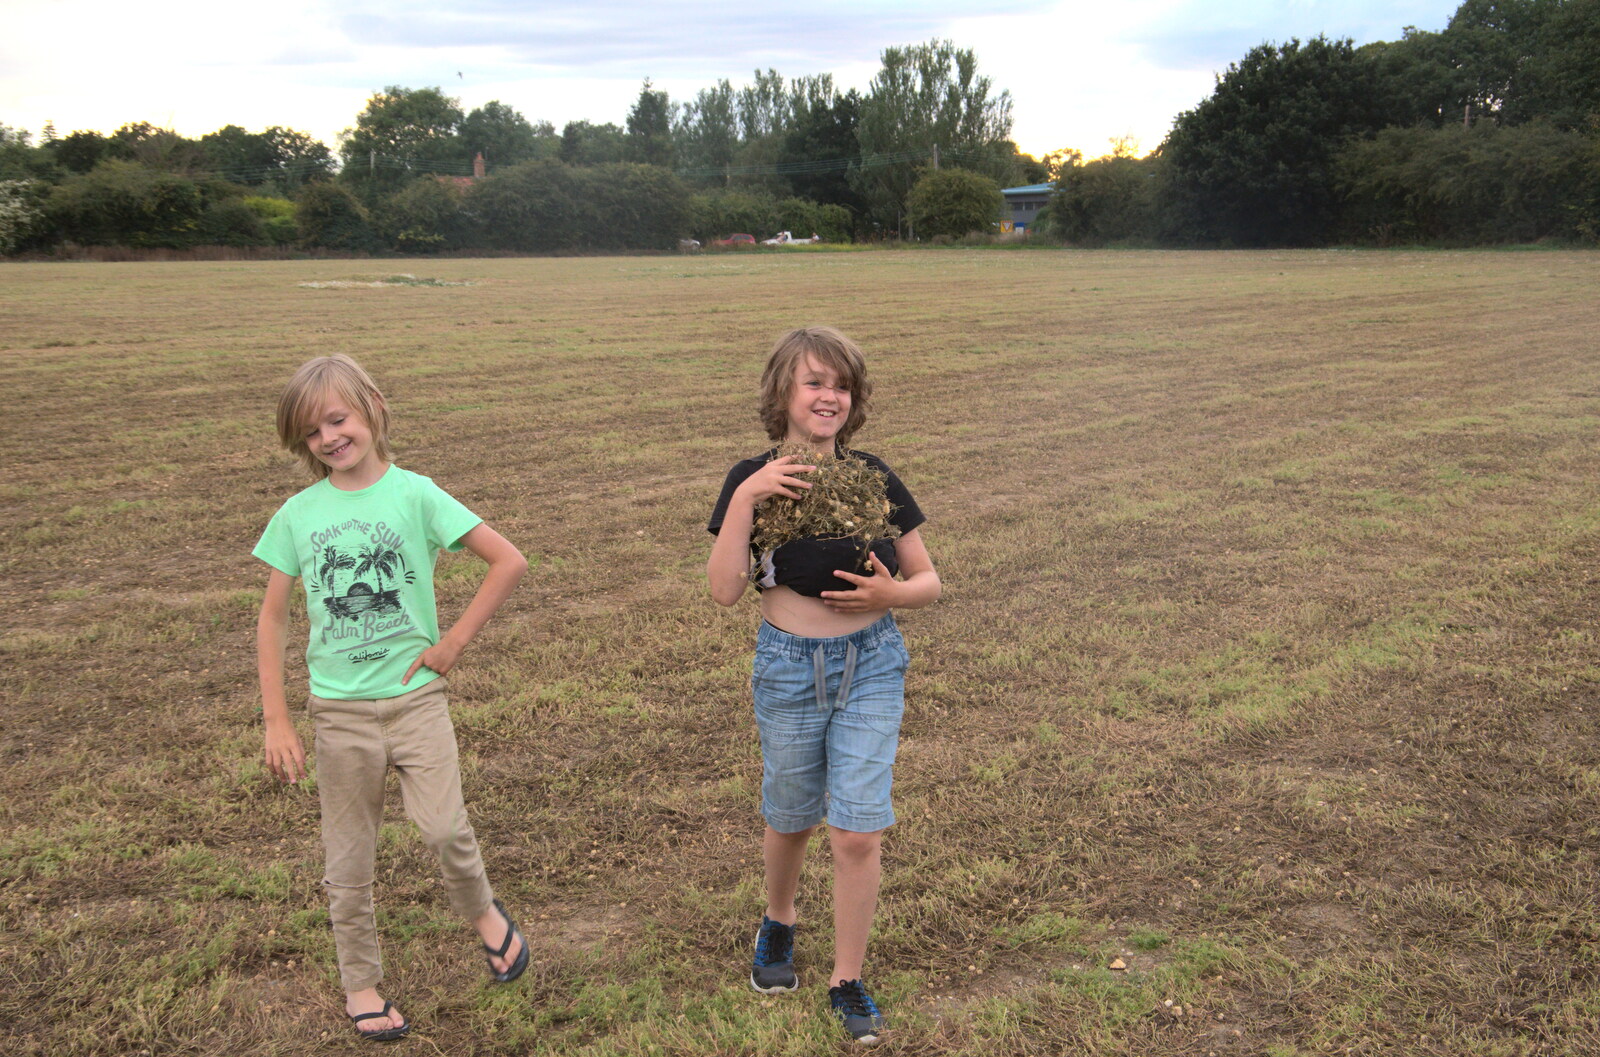 The boys collect some of the left-over chamomile from Closed-Down Shops, Hedgehogs and Chamomile, Brome and Diss - 2nd August 2020